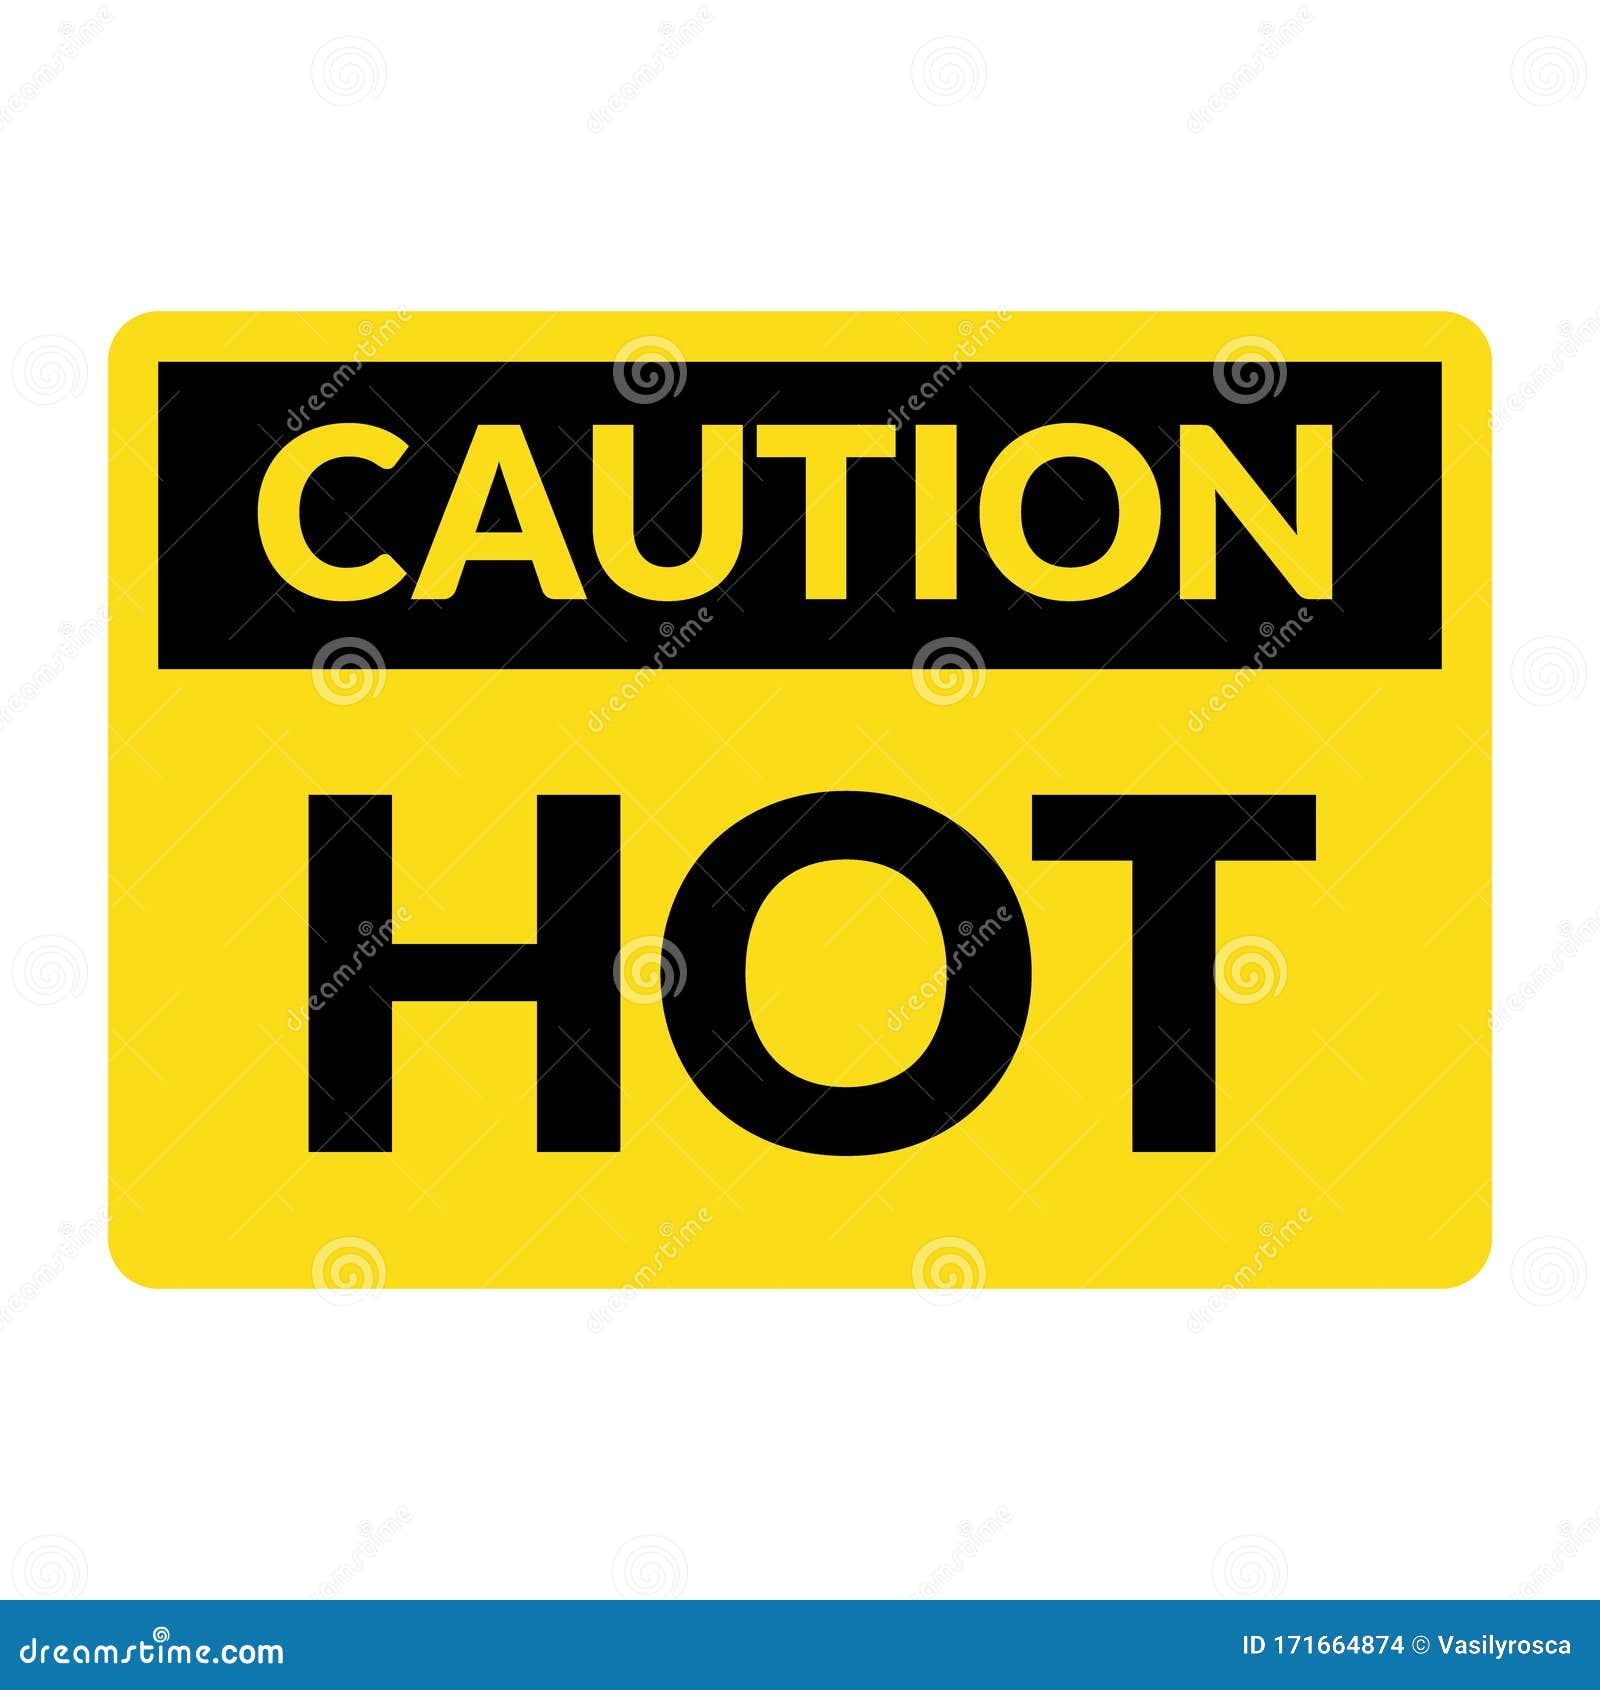 Caution Hot Warning Surface Icon. Hot Danger Sign Vector ...